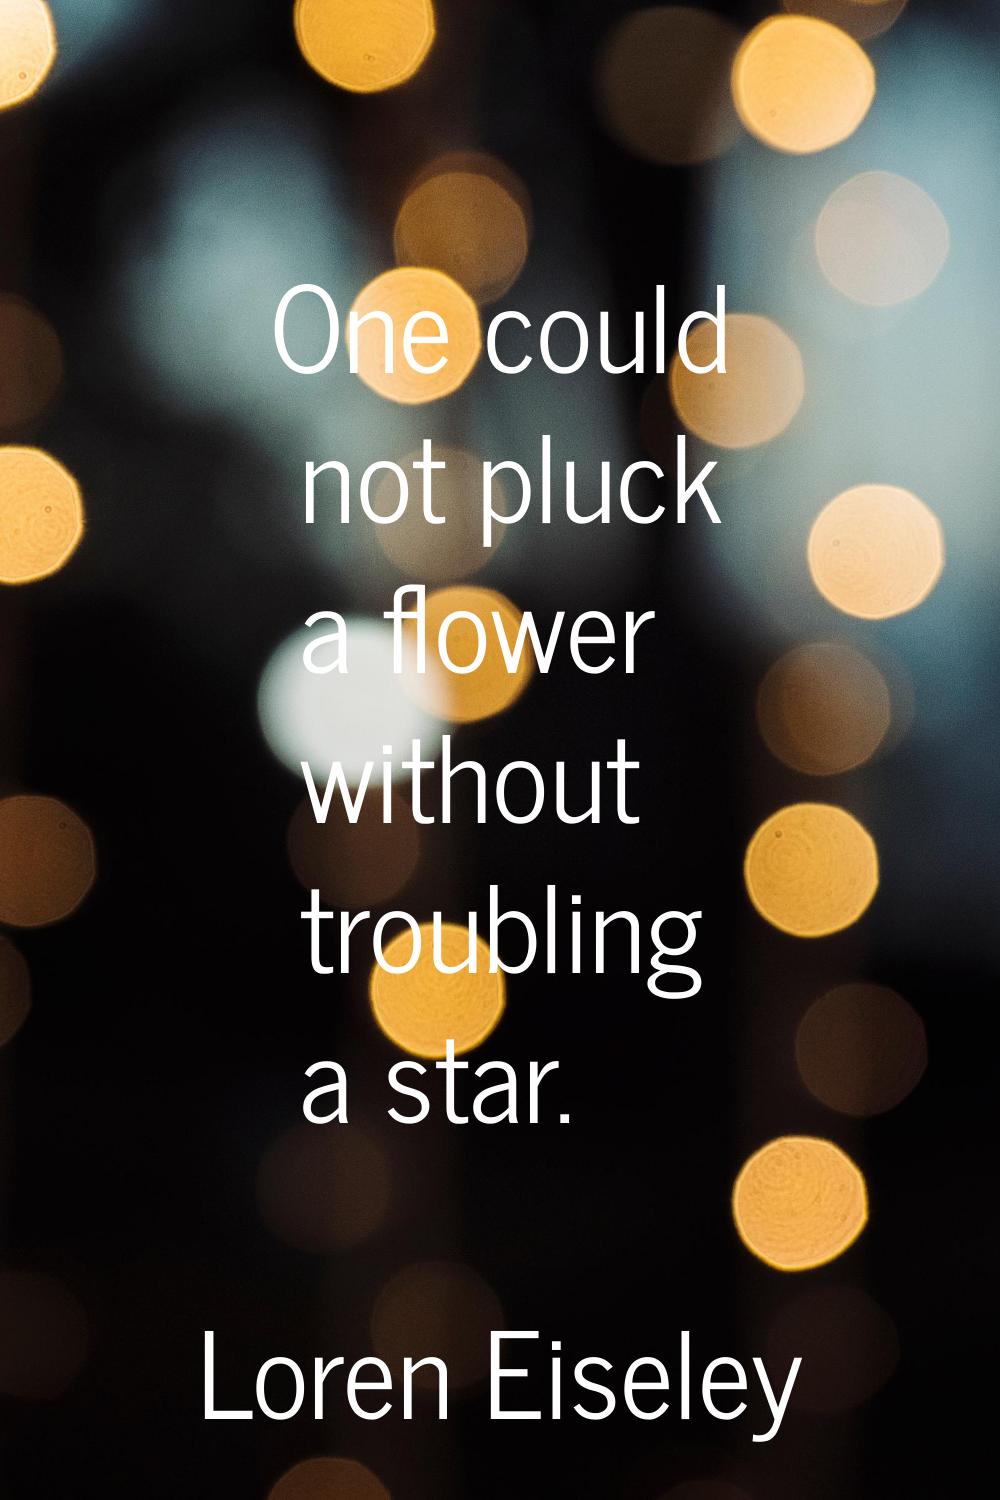 One could not pluck a flower without troubling a star.